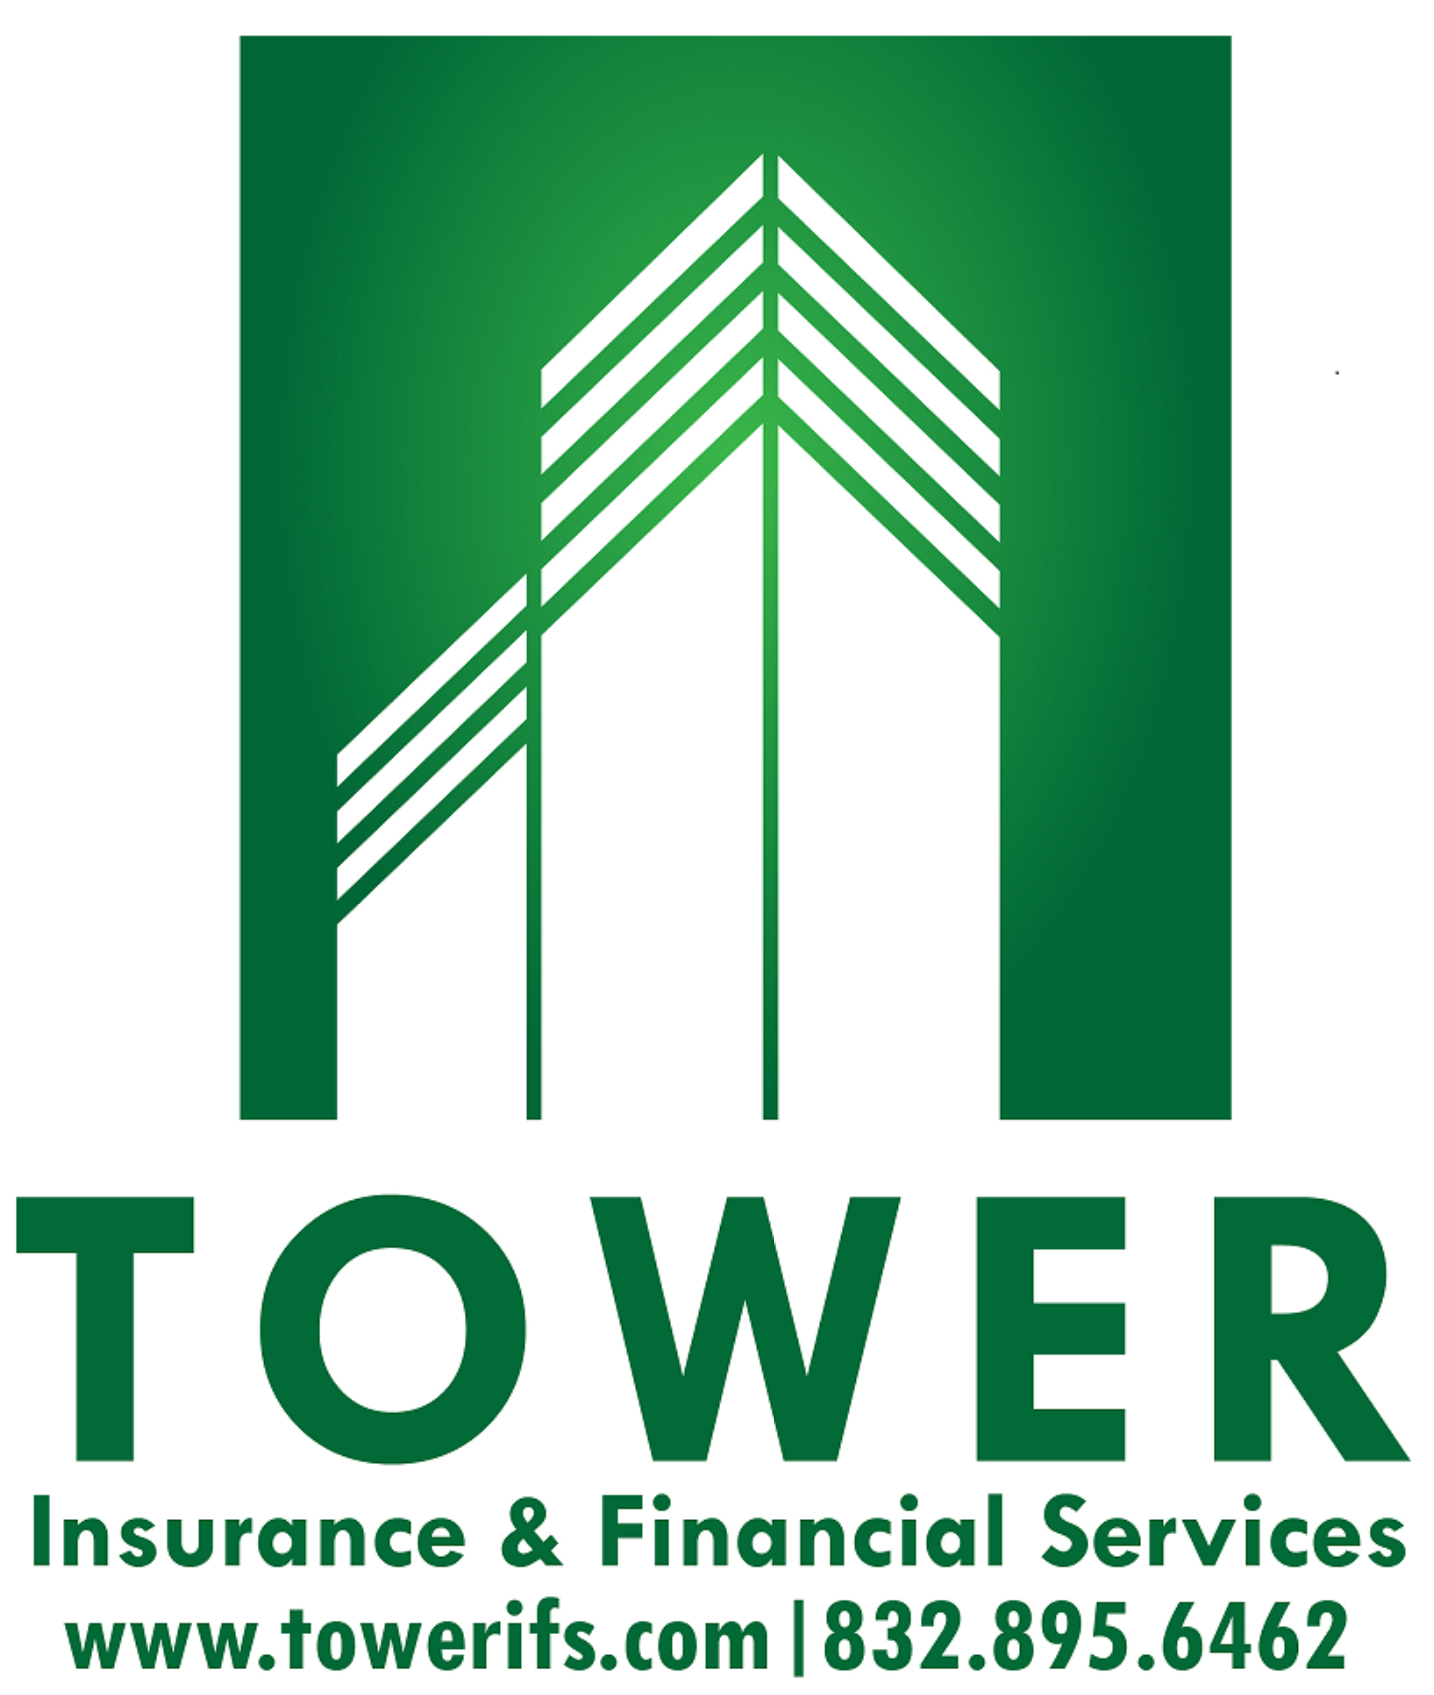 Tower Insurance & Financial Services